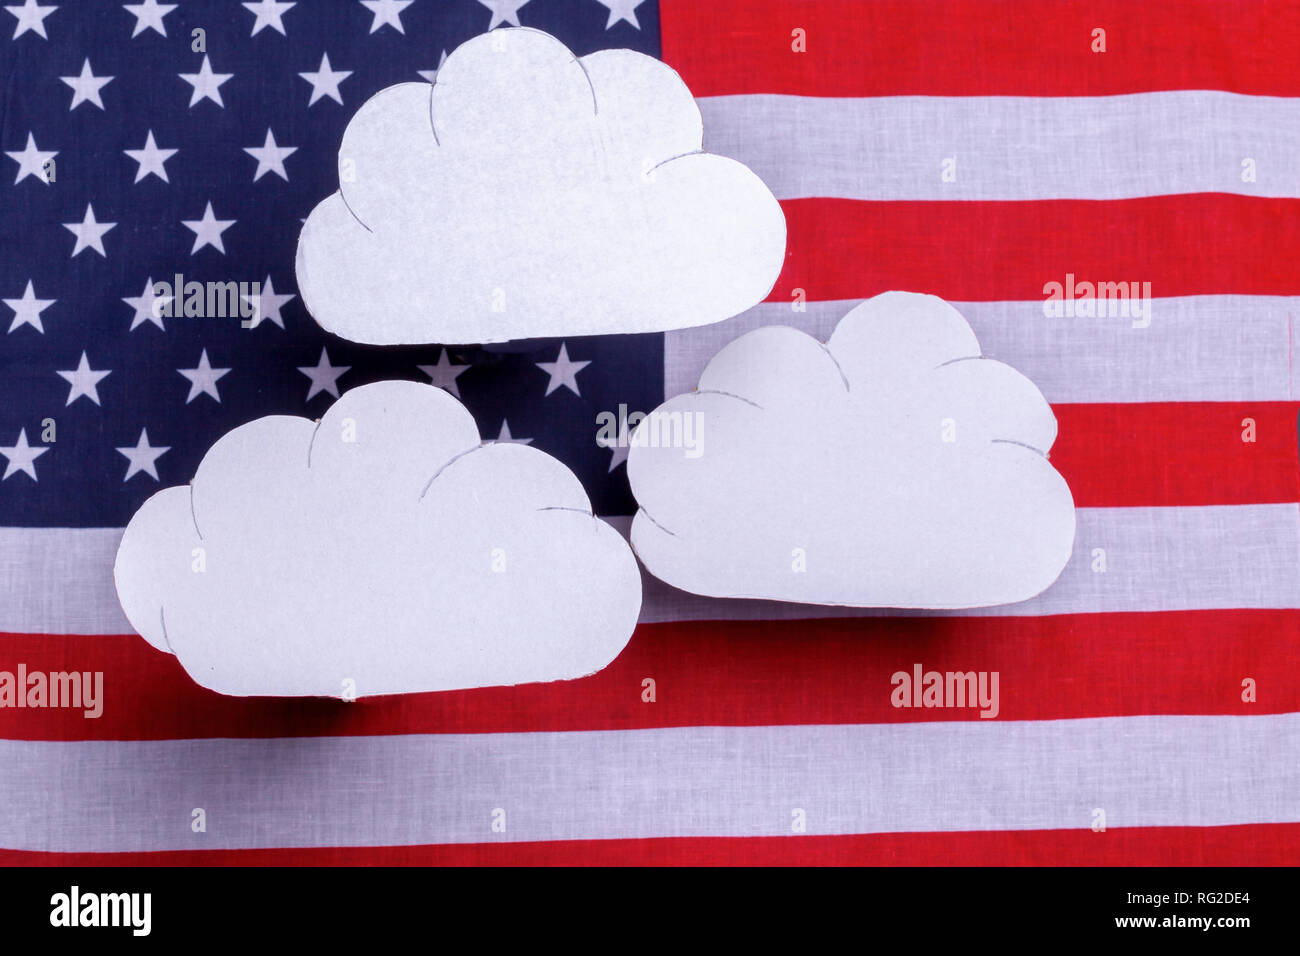 American flag star spangled banner with three white clouds floating over the flag. Red white and blue old glory country symbol with cutout toy weather Stock Photo